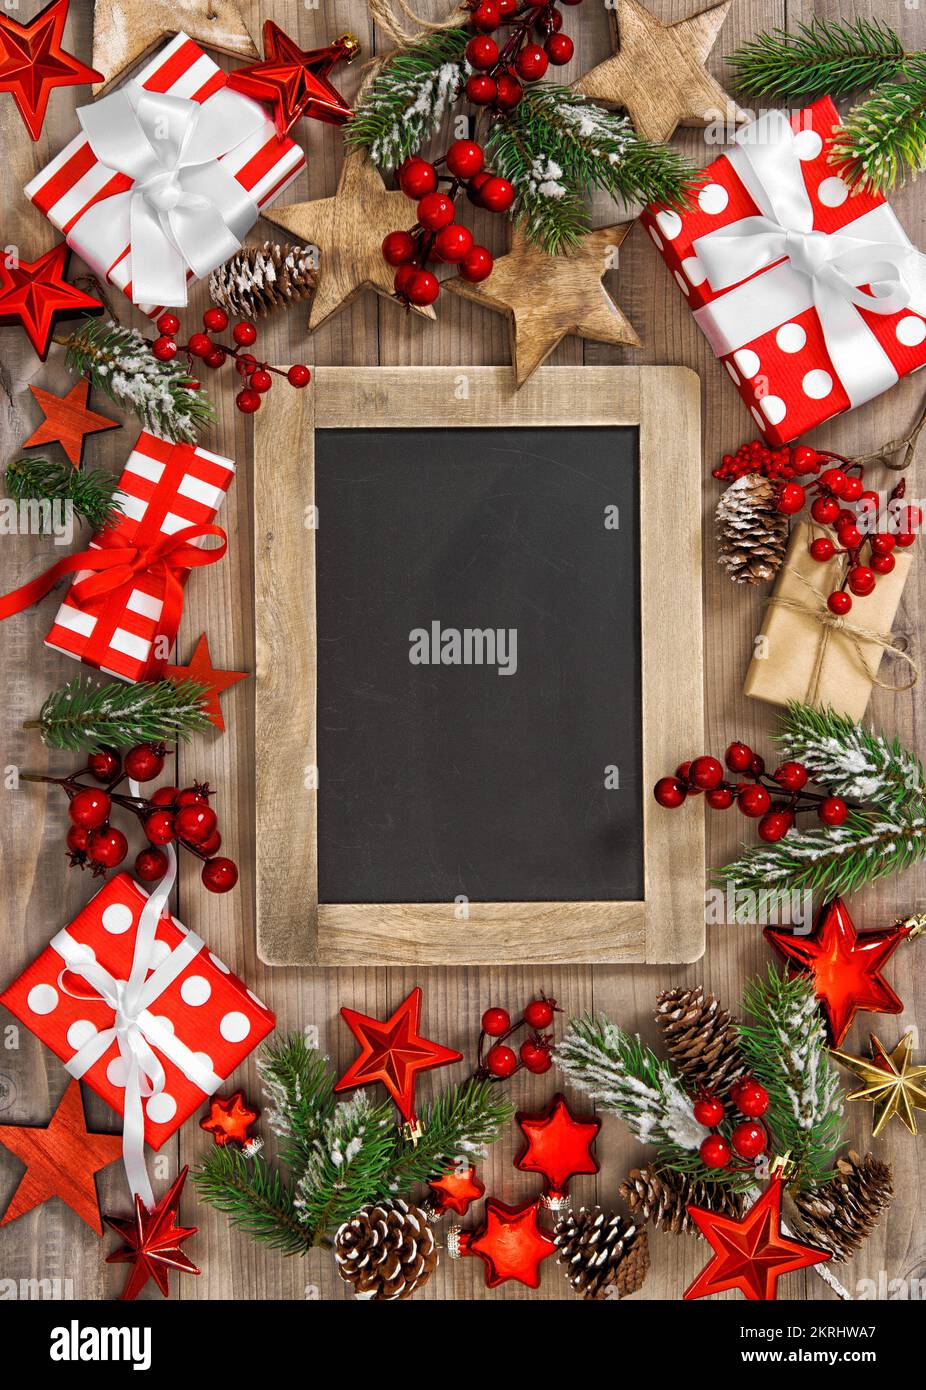 Christmas decoration wooden sign chalkboard gifts ornaments Stock Photo